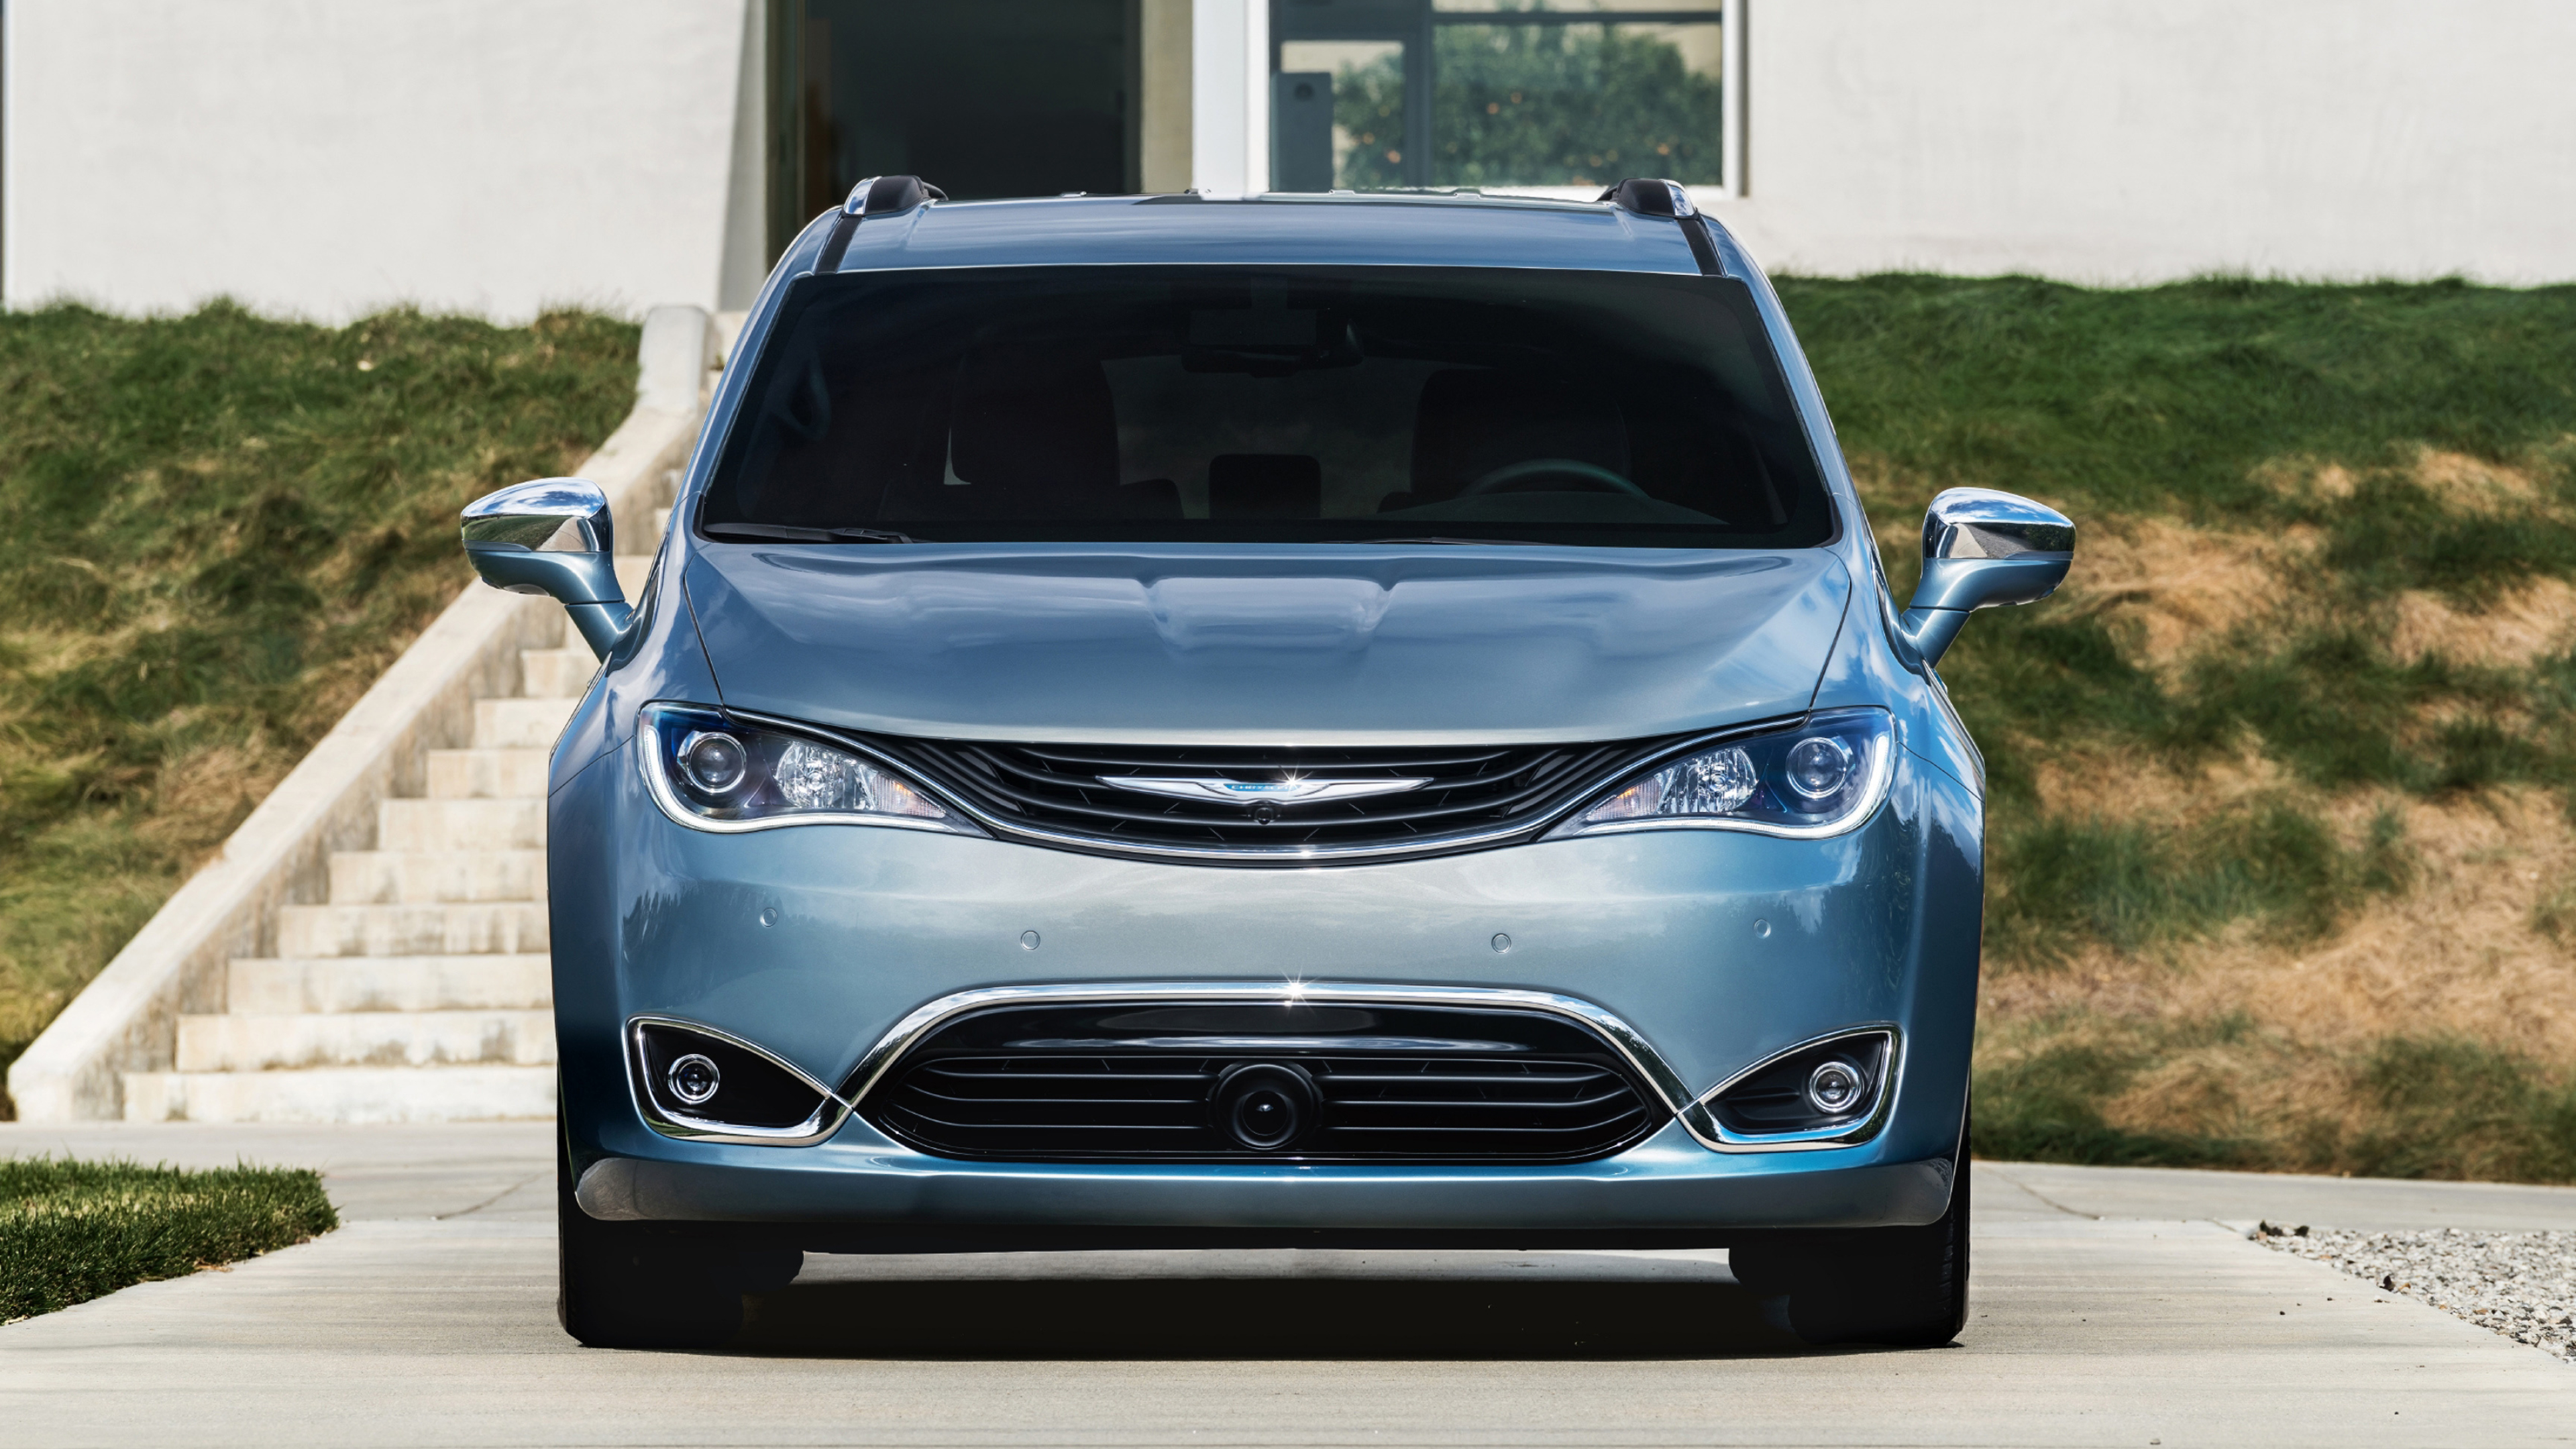 Chrysler Pacifica, Hybrid technology, Eco-friendly driving, Spacious and stylish, 3840x2160 4K Desktop